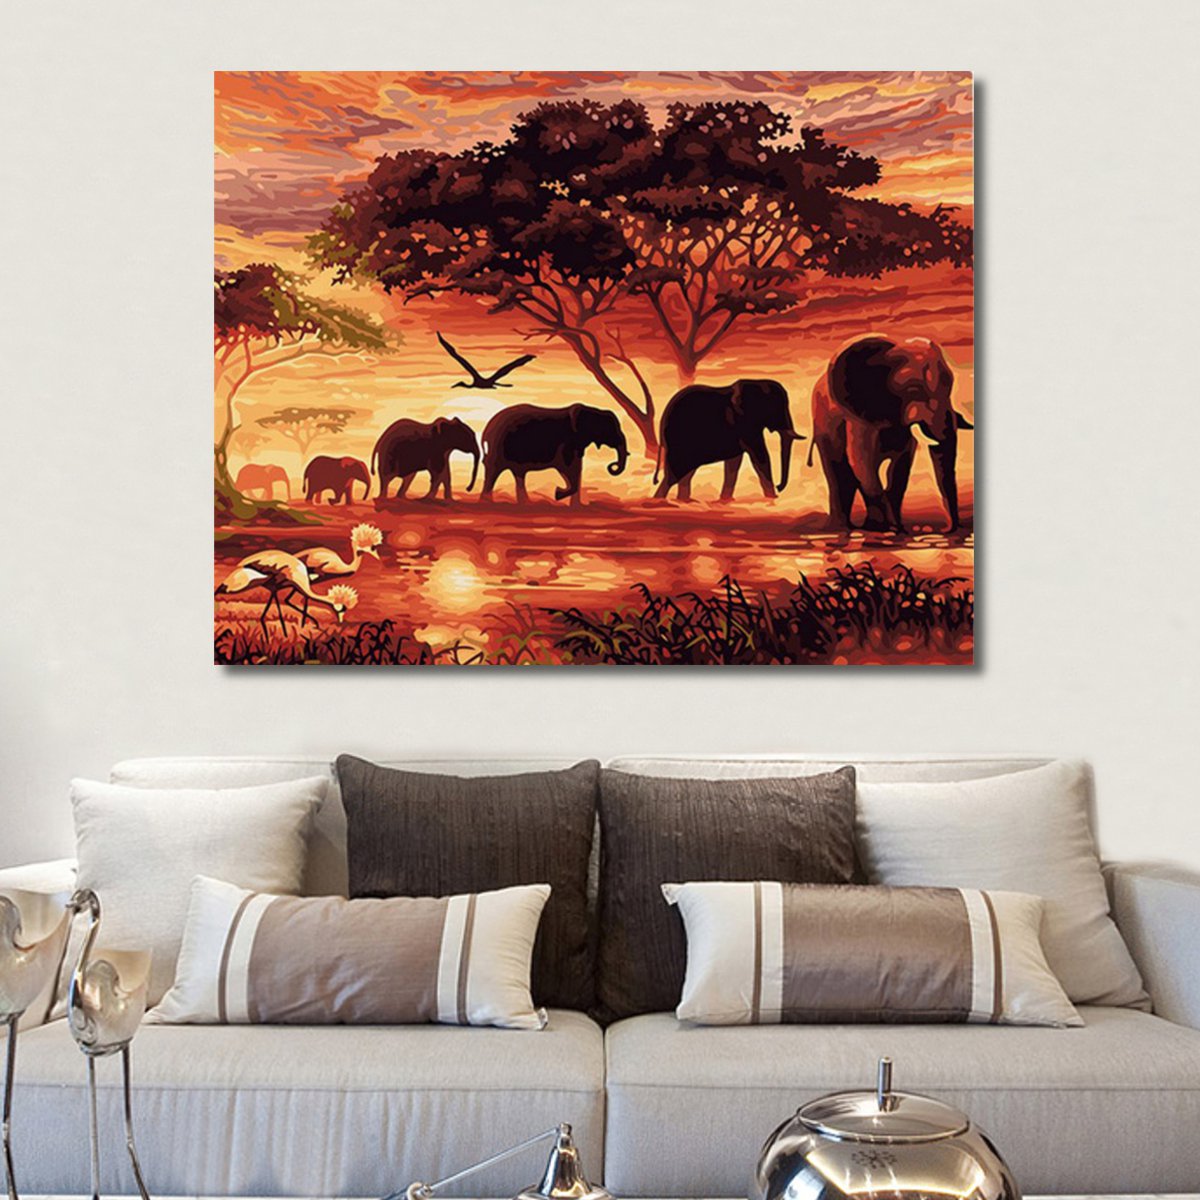 

RUOPOTY Elephants Landscape DIY Digital Painting By Numbers Modern Wall Art Canvas Painting Unique Gift For Home Decor 40x50cm